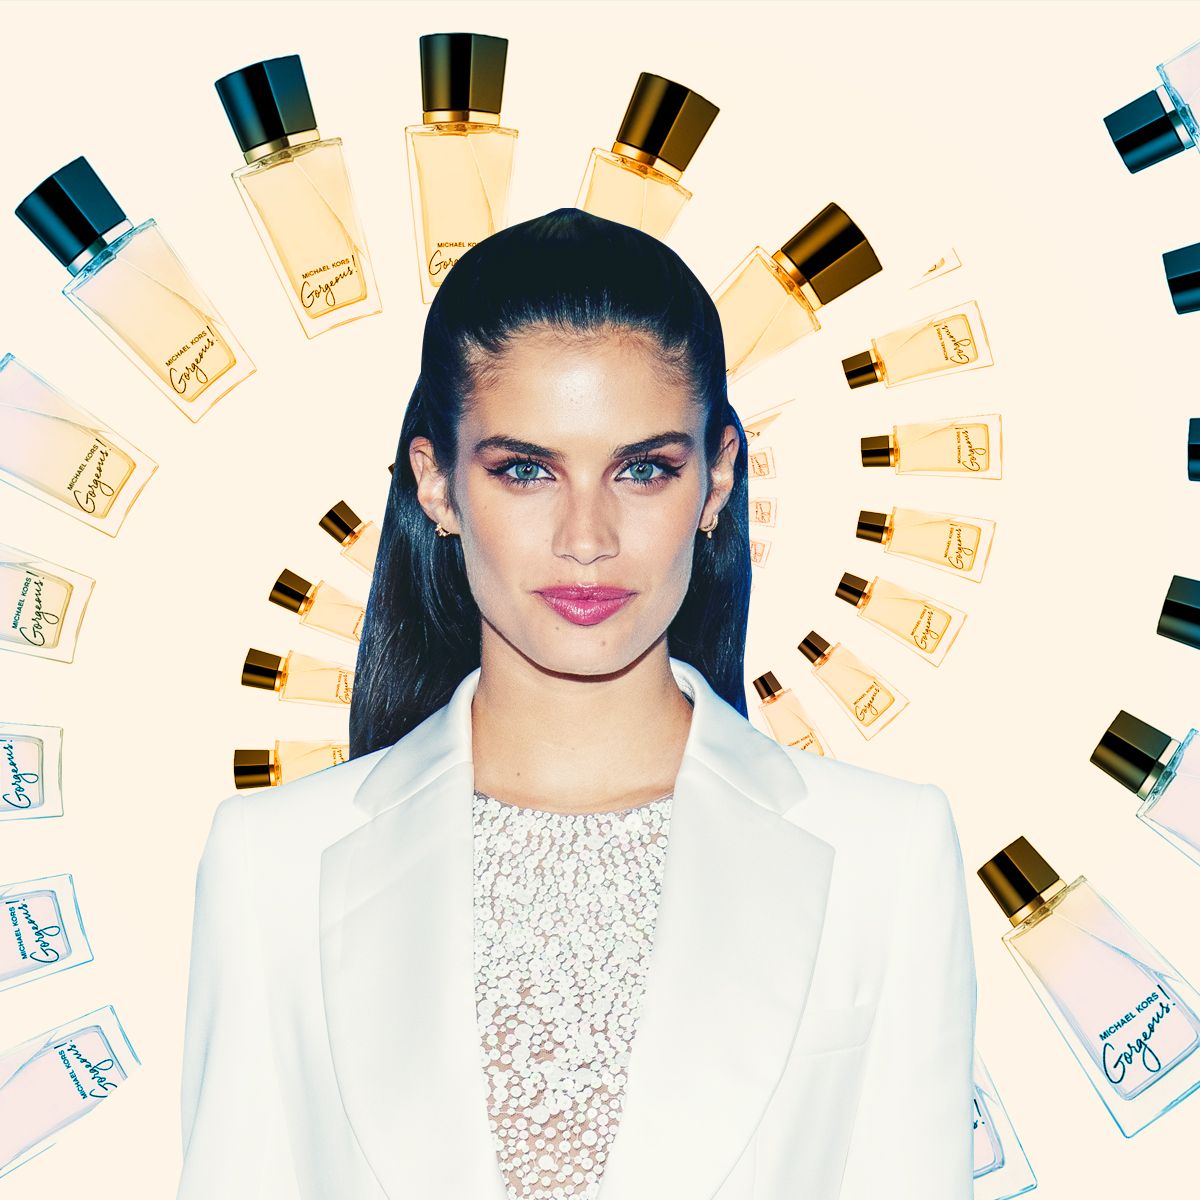 Sara Sampaio Is the Face of Michael Kors's Newest Fragrance